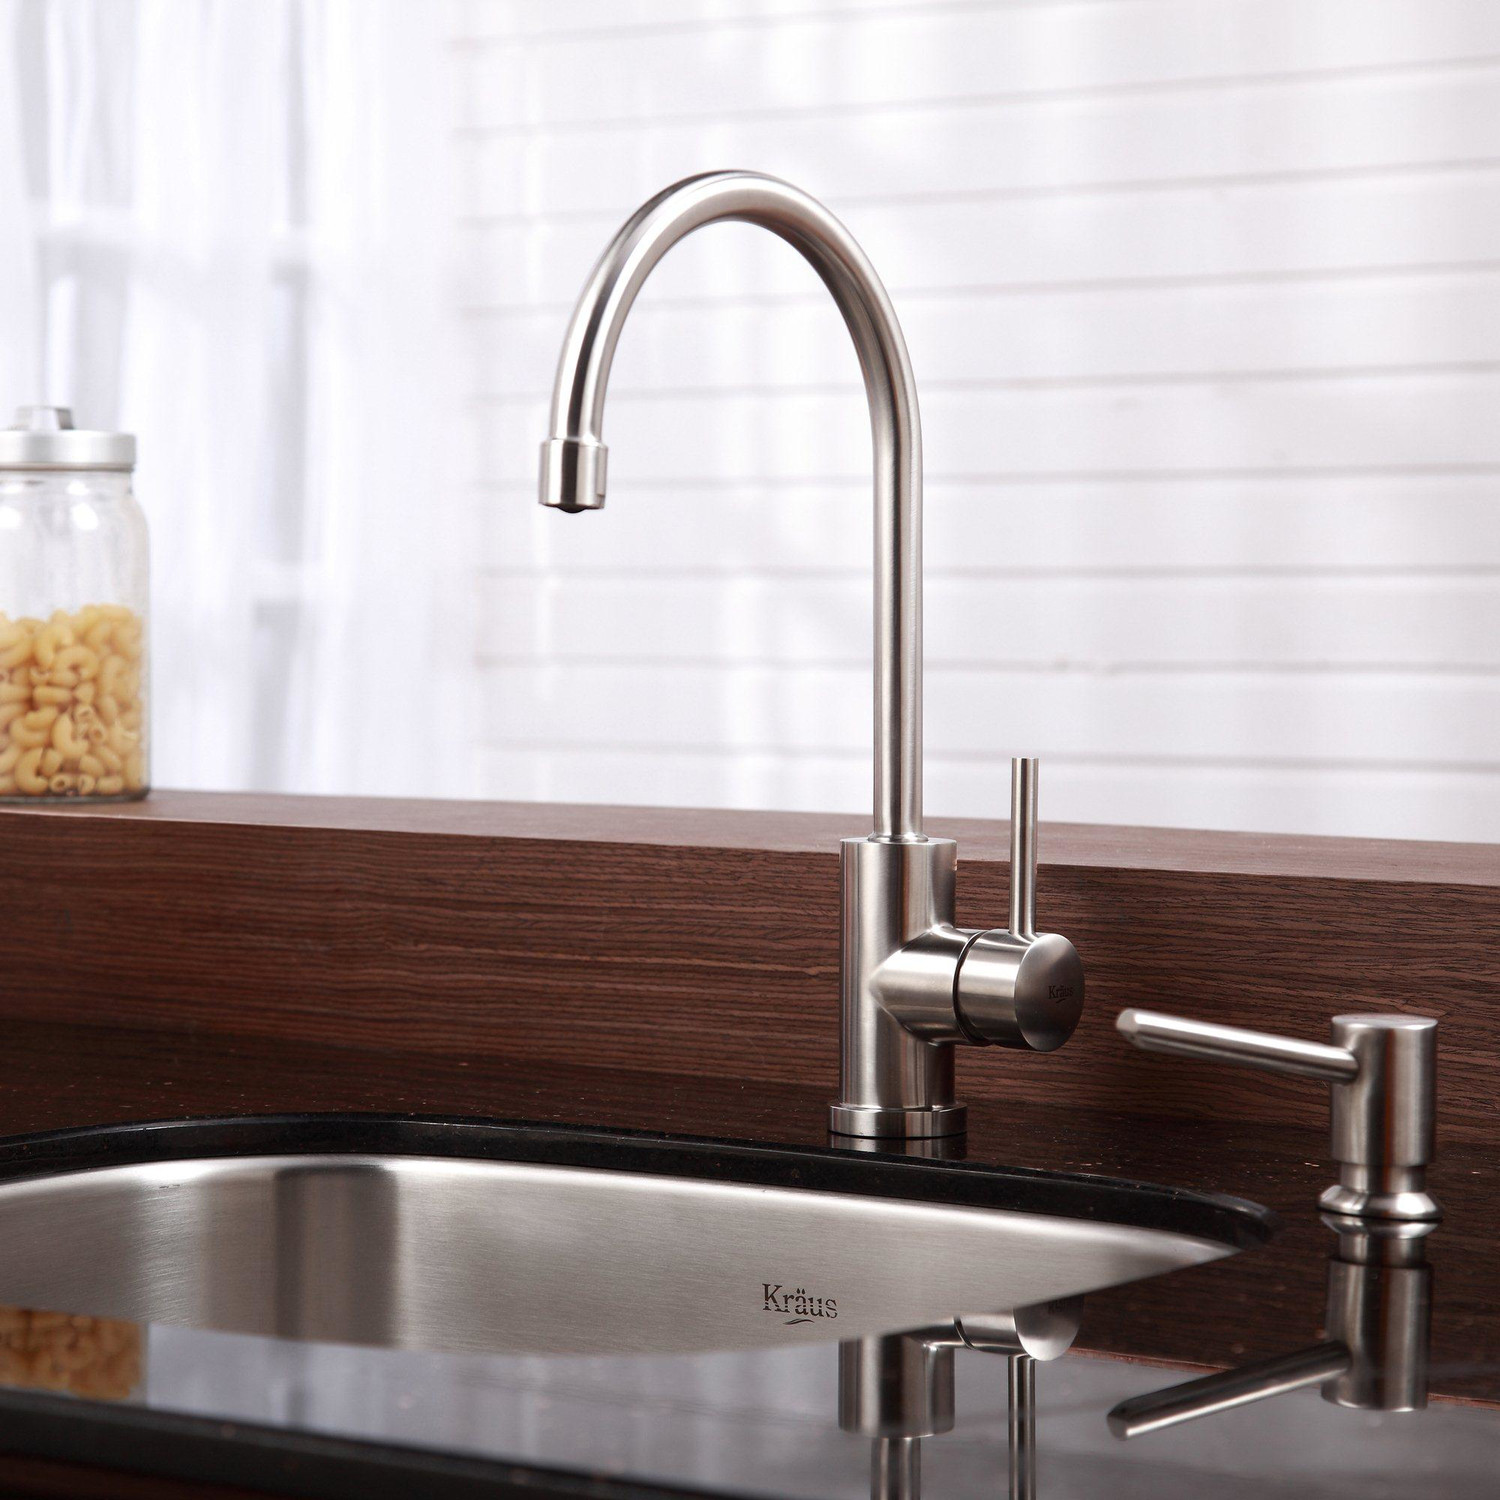 Kraus Stainless Faucet Appealing Kraus Stainless Steel Kitchen Faucet With Glossy Surface On Wide Mounted Sink Bowl Kitchens 10 Stainless Steel Kitchen Faucet To Complement The Functionality